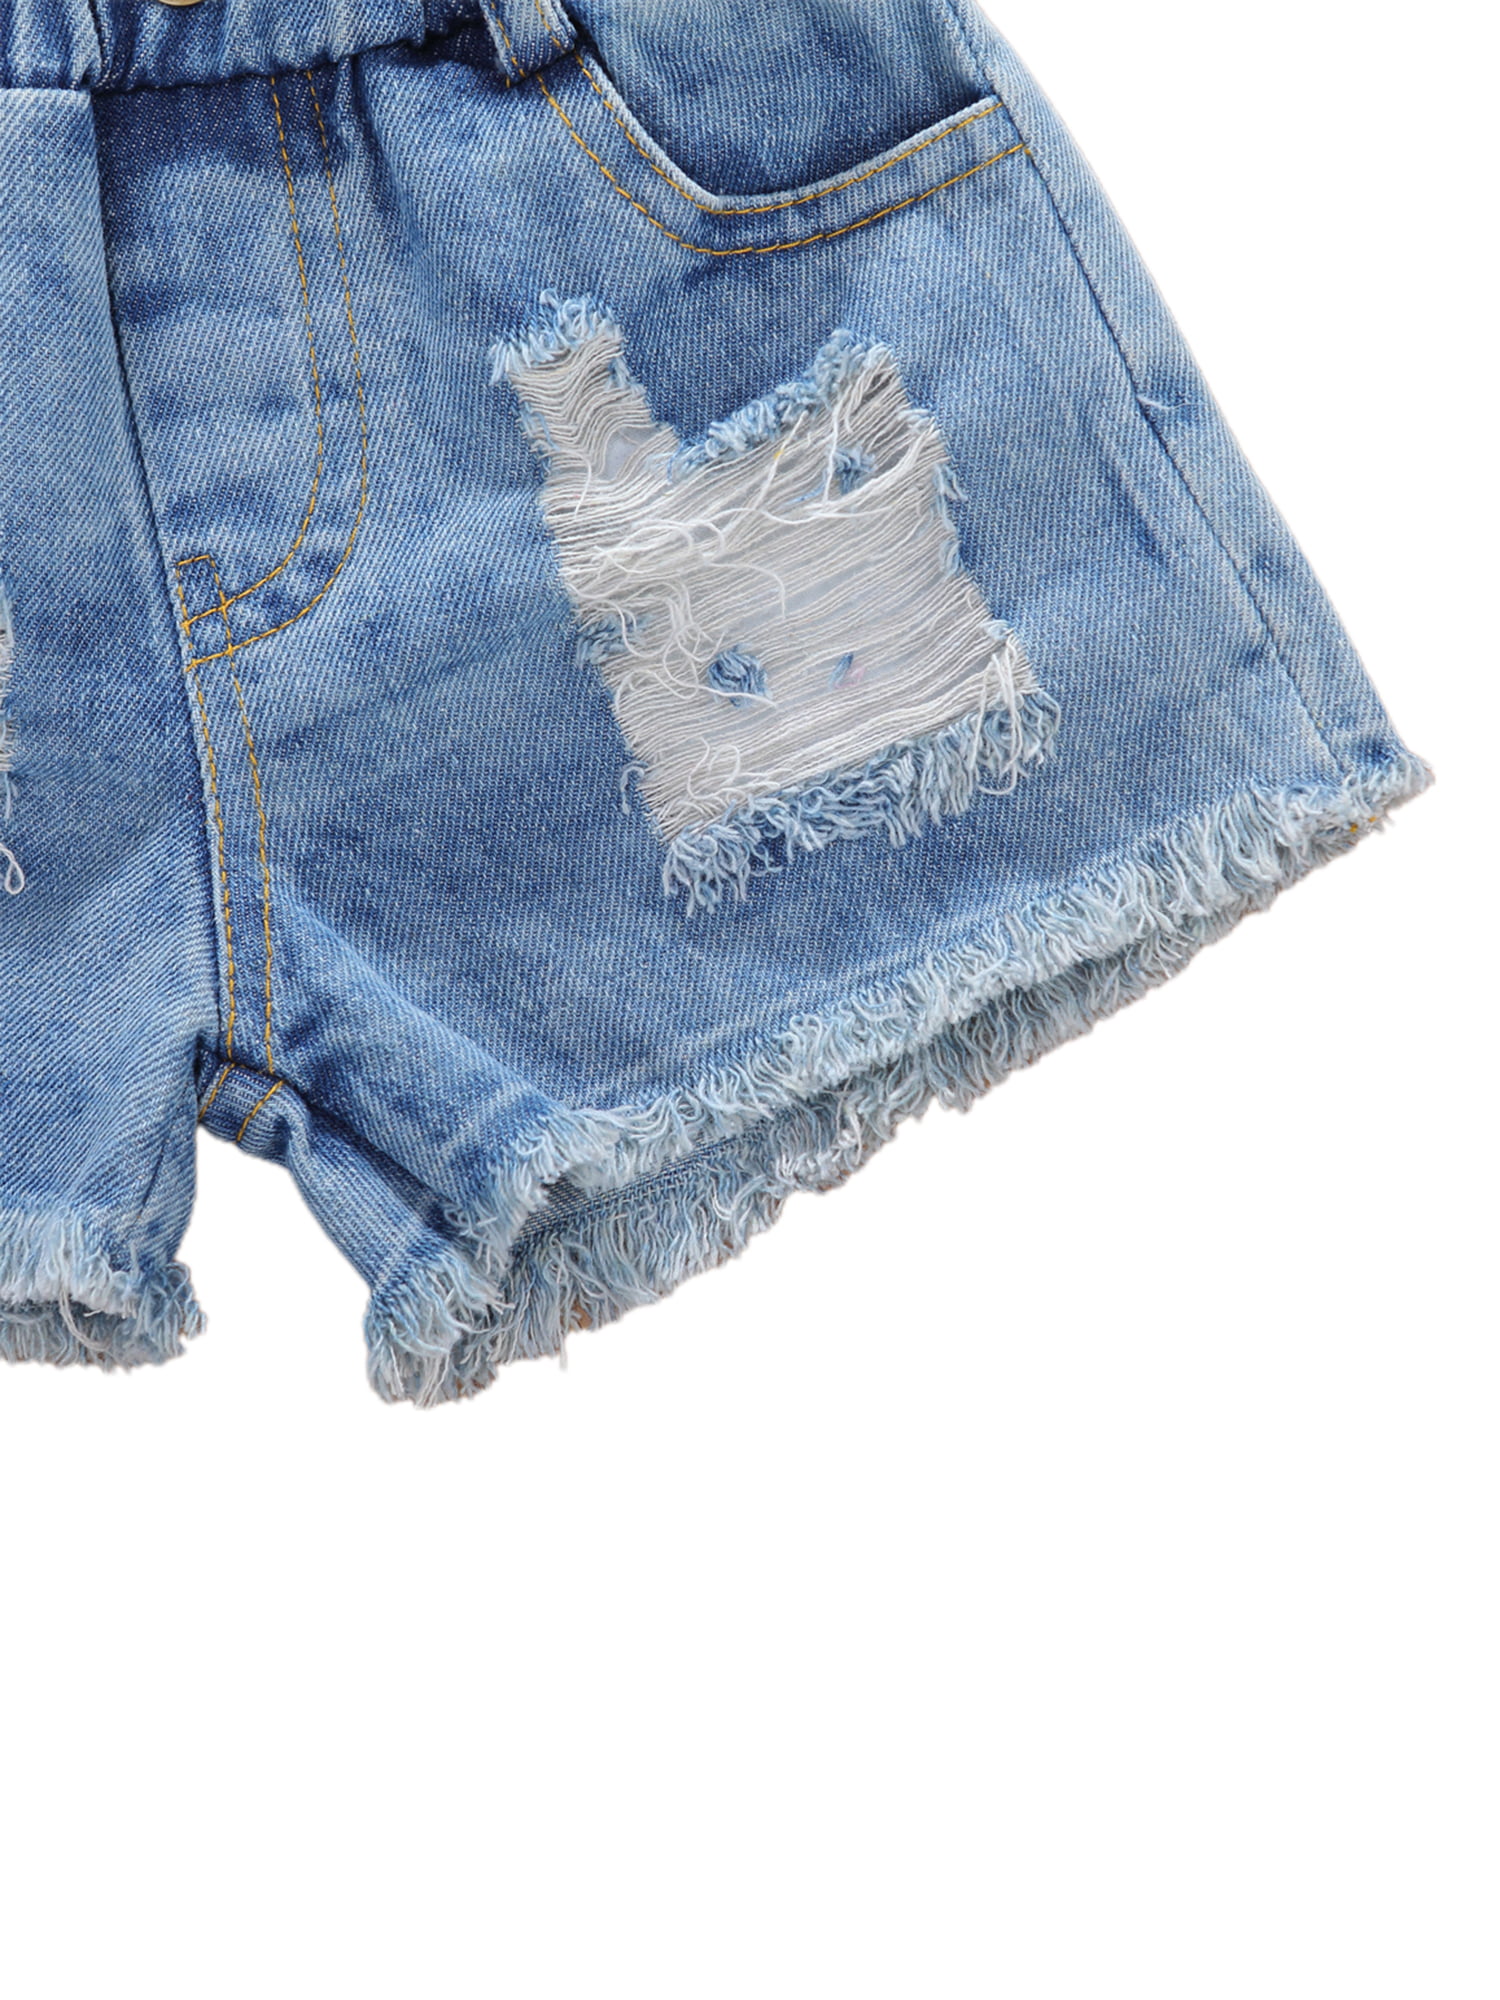 Summer Crop Top And Denim Shorts Set Out For Teenage Girls Outfit In Sizes  4 12 220620 From Jiao09, $14.18